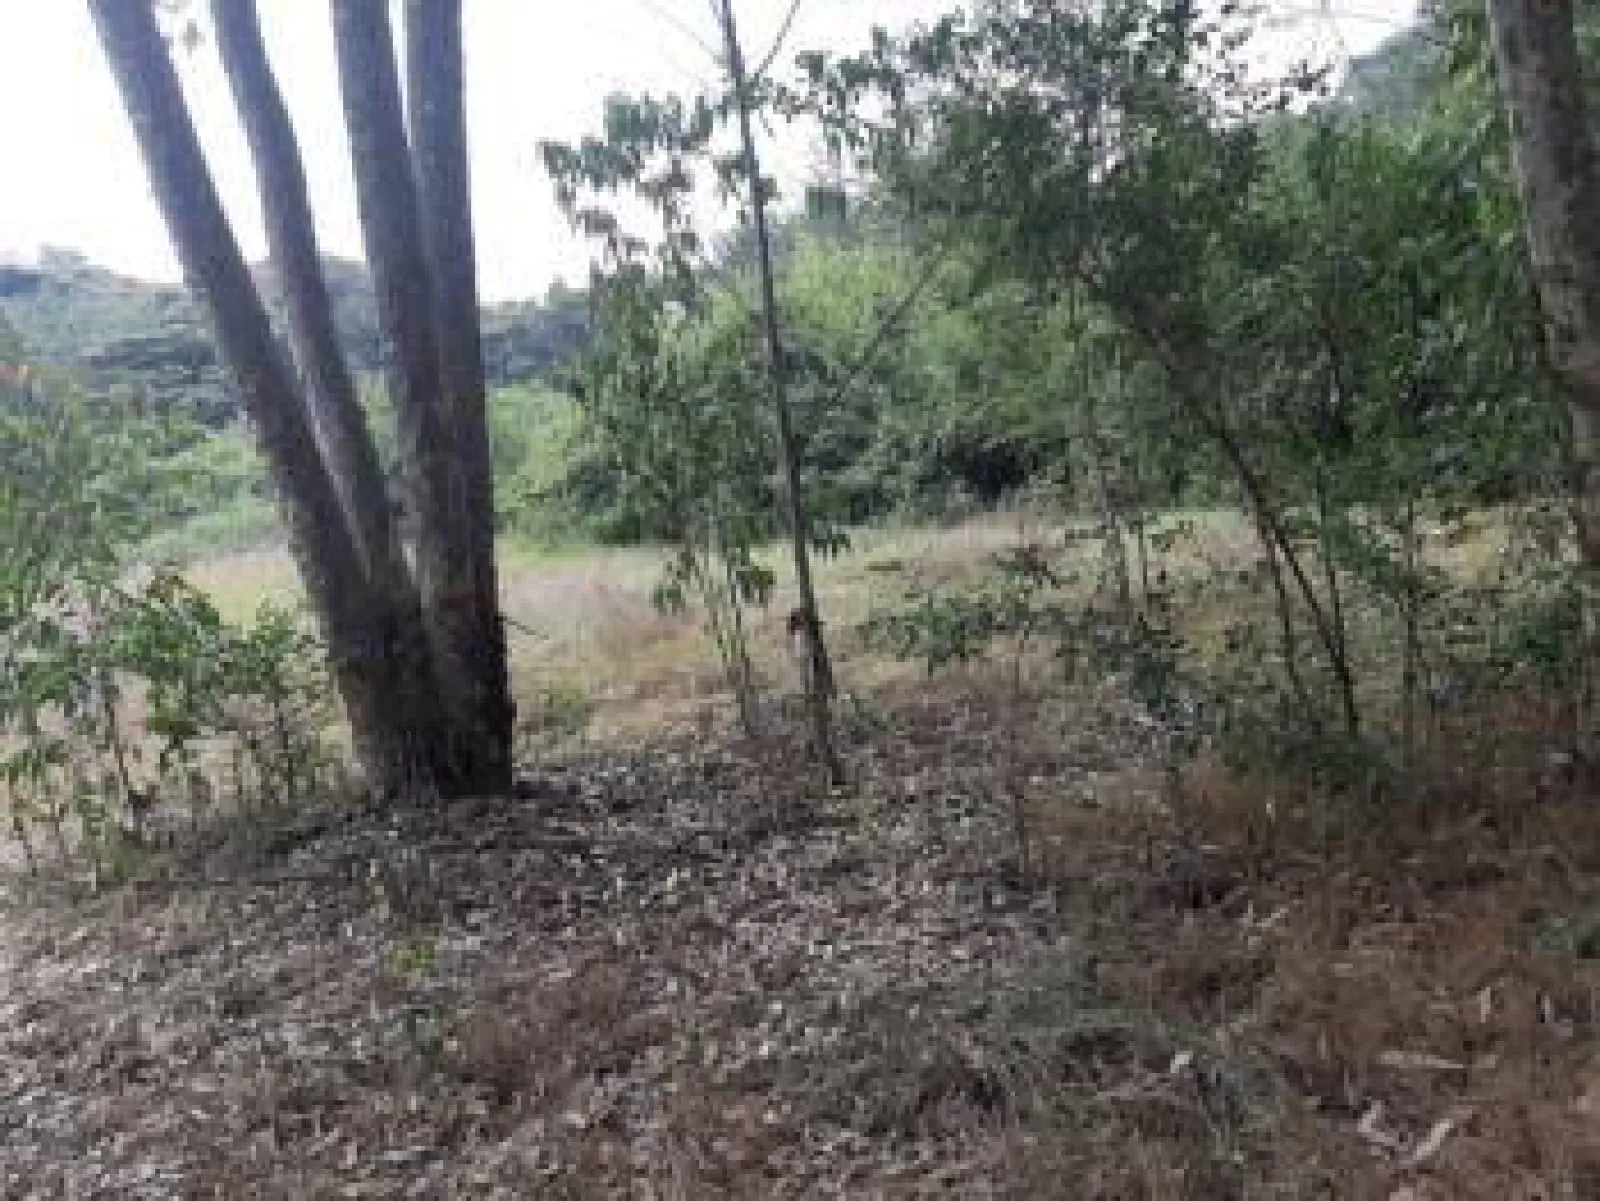 Land for sale in Karen Hardy 1.25 Acres 75M ONLY choice of two Ready Title Deed QUICK SALE Exclusive🔥